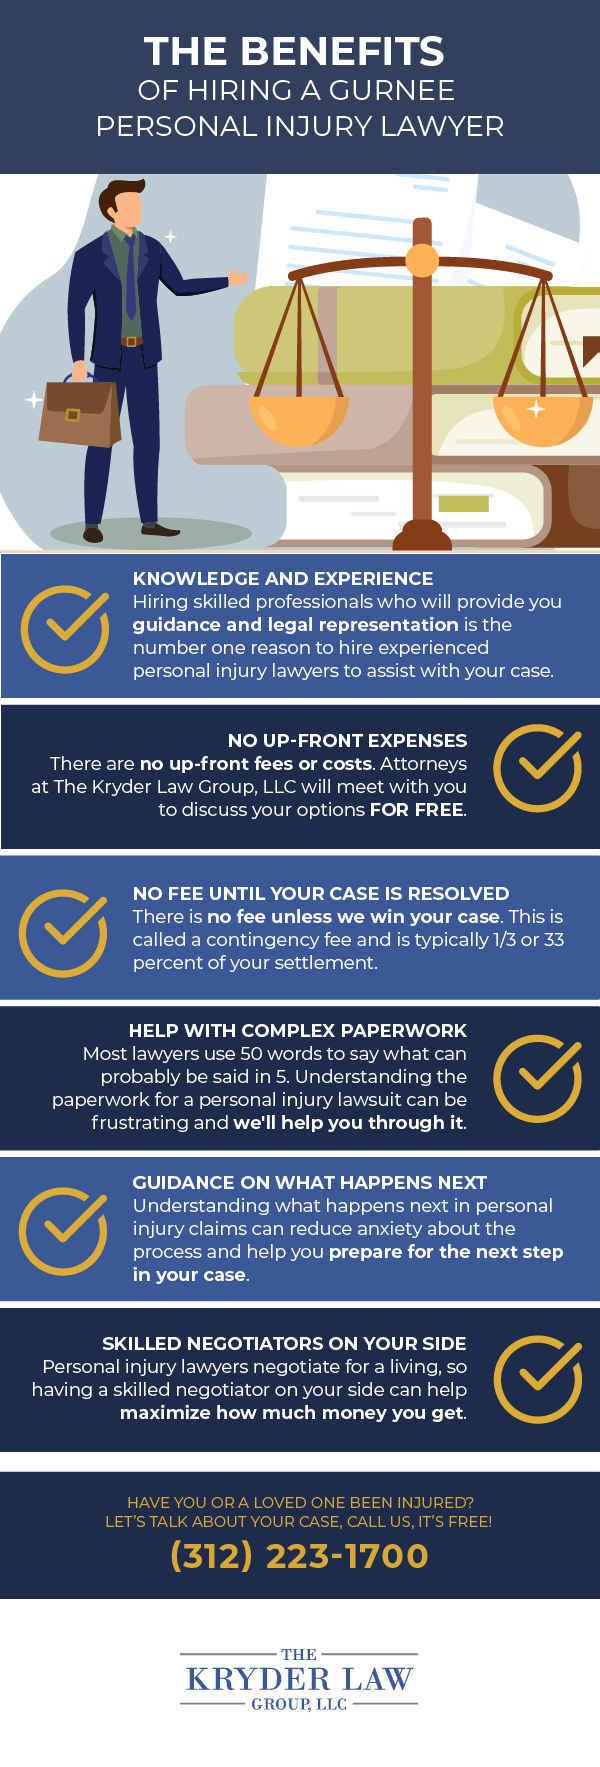 The Benefits of Hiring a Gurnee Personal Injury Lawyer Infographic